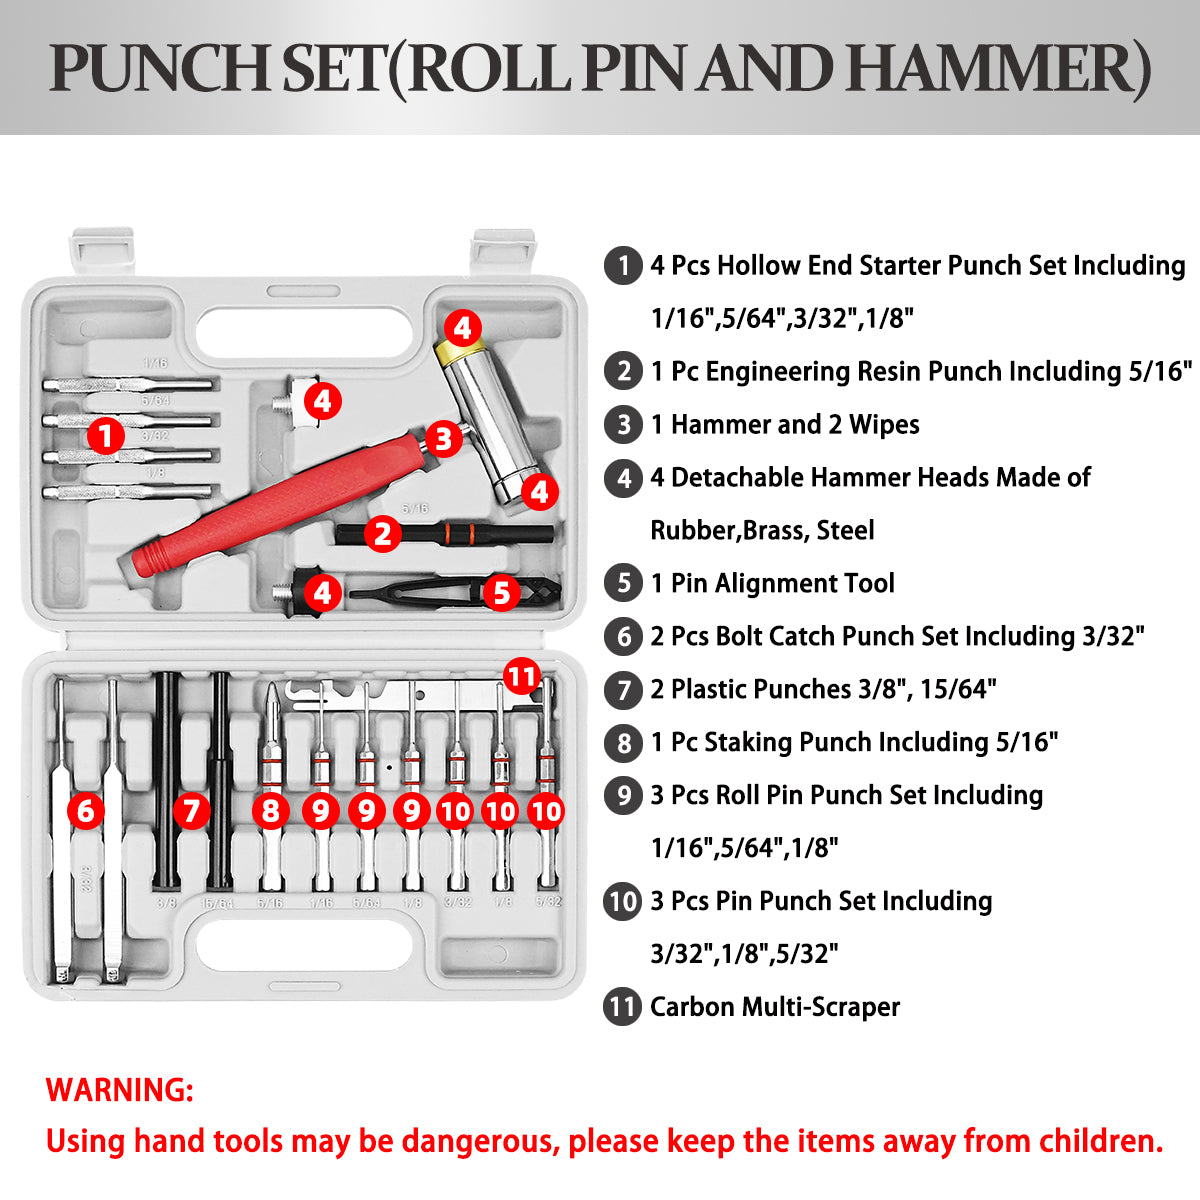 BESTNULE Roll Pin Punch Set, Punch Tools, Made of Solid Material Including Steel Punch and Hammer, Ideal for Machinery Maintenance with Organizer Storage Container (Without Bench Block)